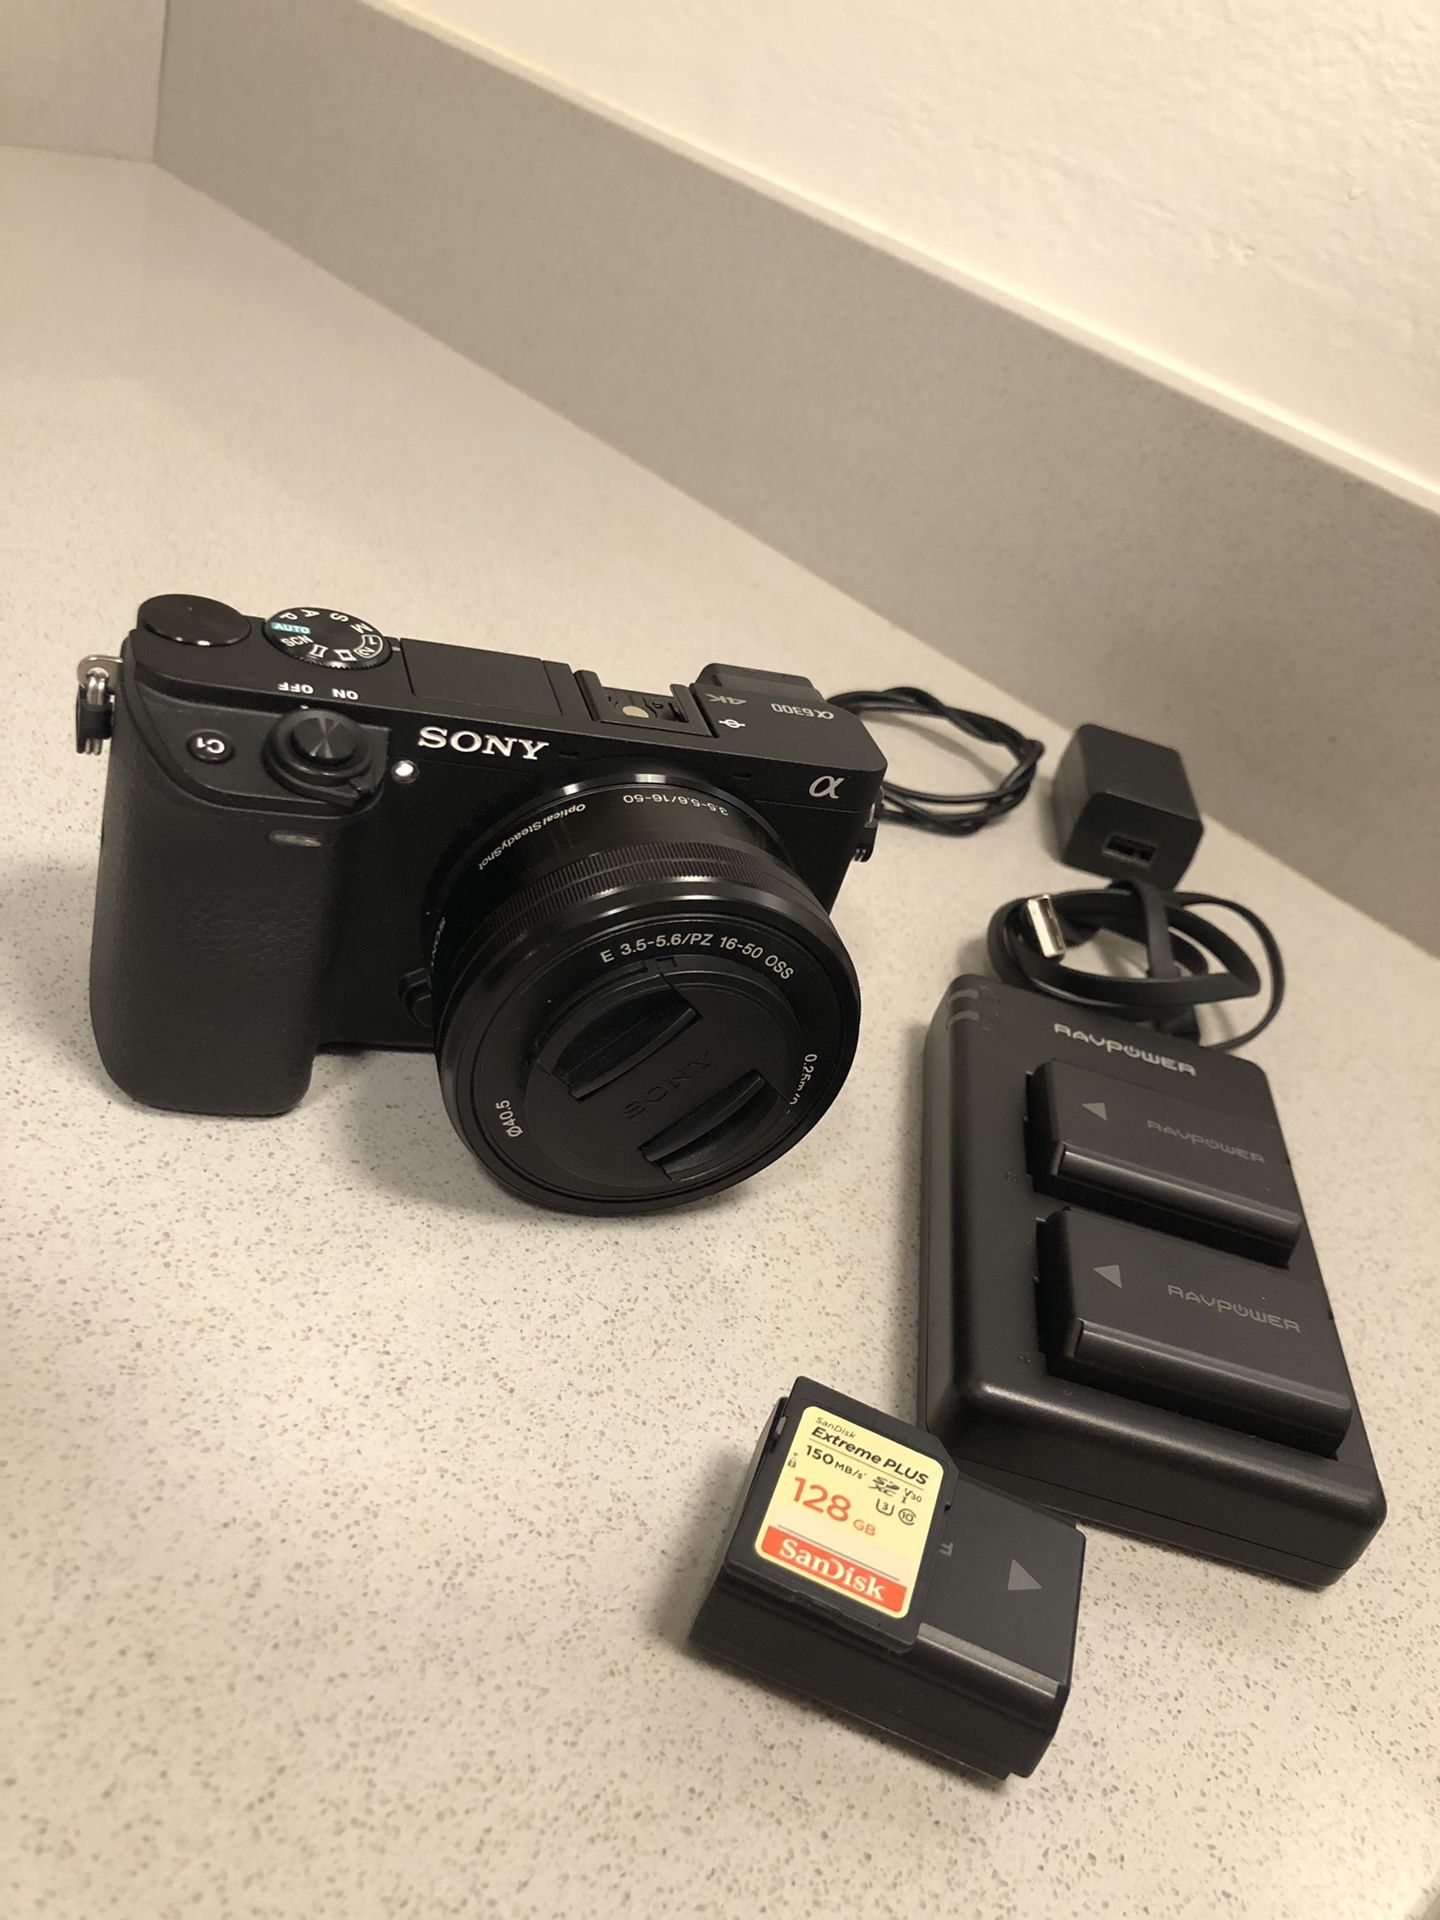 Sony a6300 w/ kit lens and extras like new!